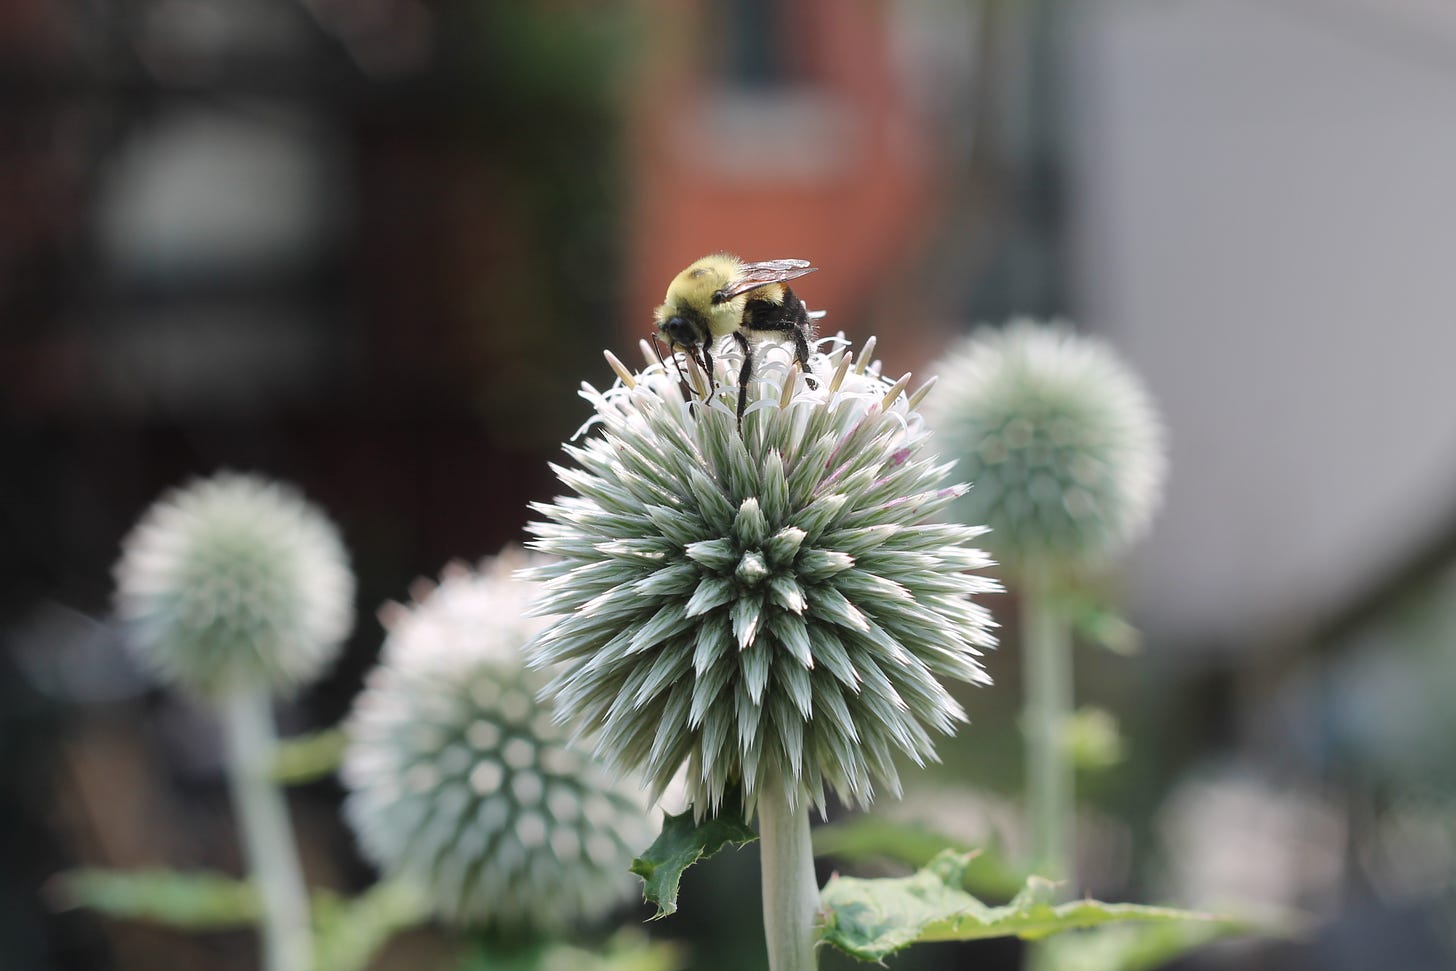 A bumblebee perched on top of the round, spiky blue-grey ball of an echinops (globe thistle). It's pulling out thread of flower sprouting like hairs on the top of the globe.